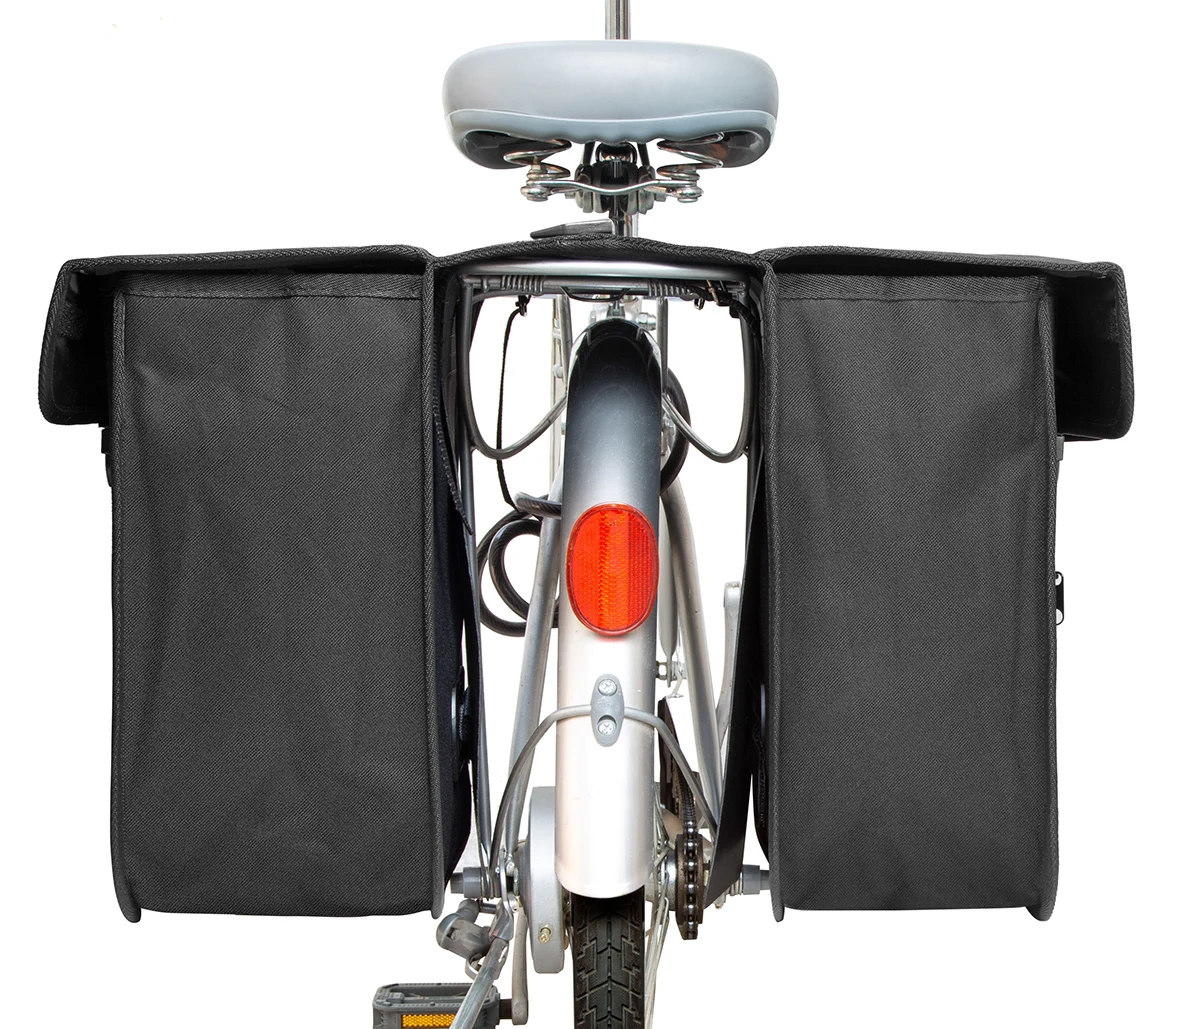 Photography of black bicycle luggage bags